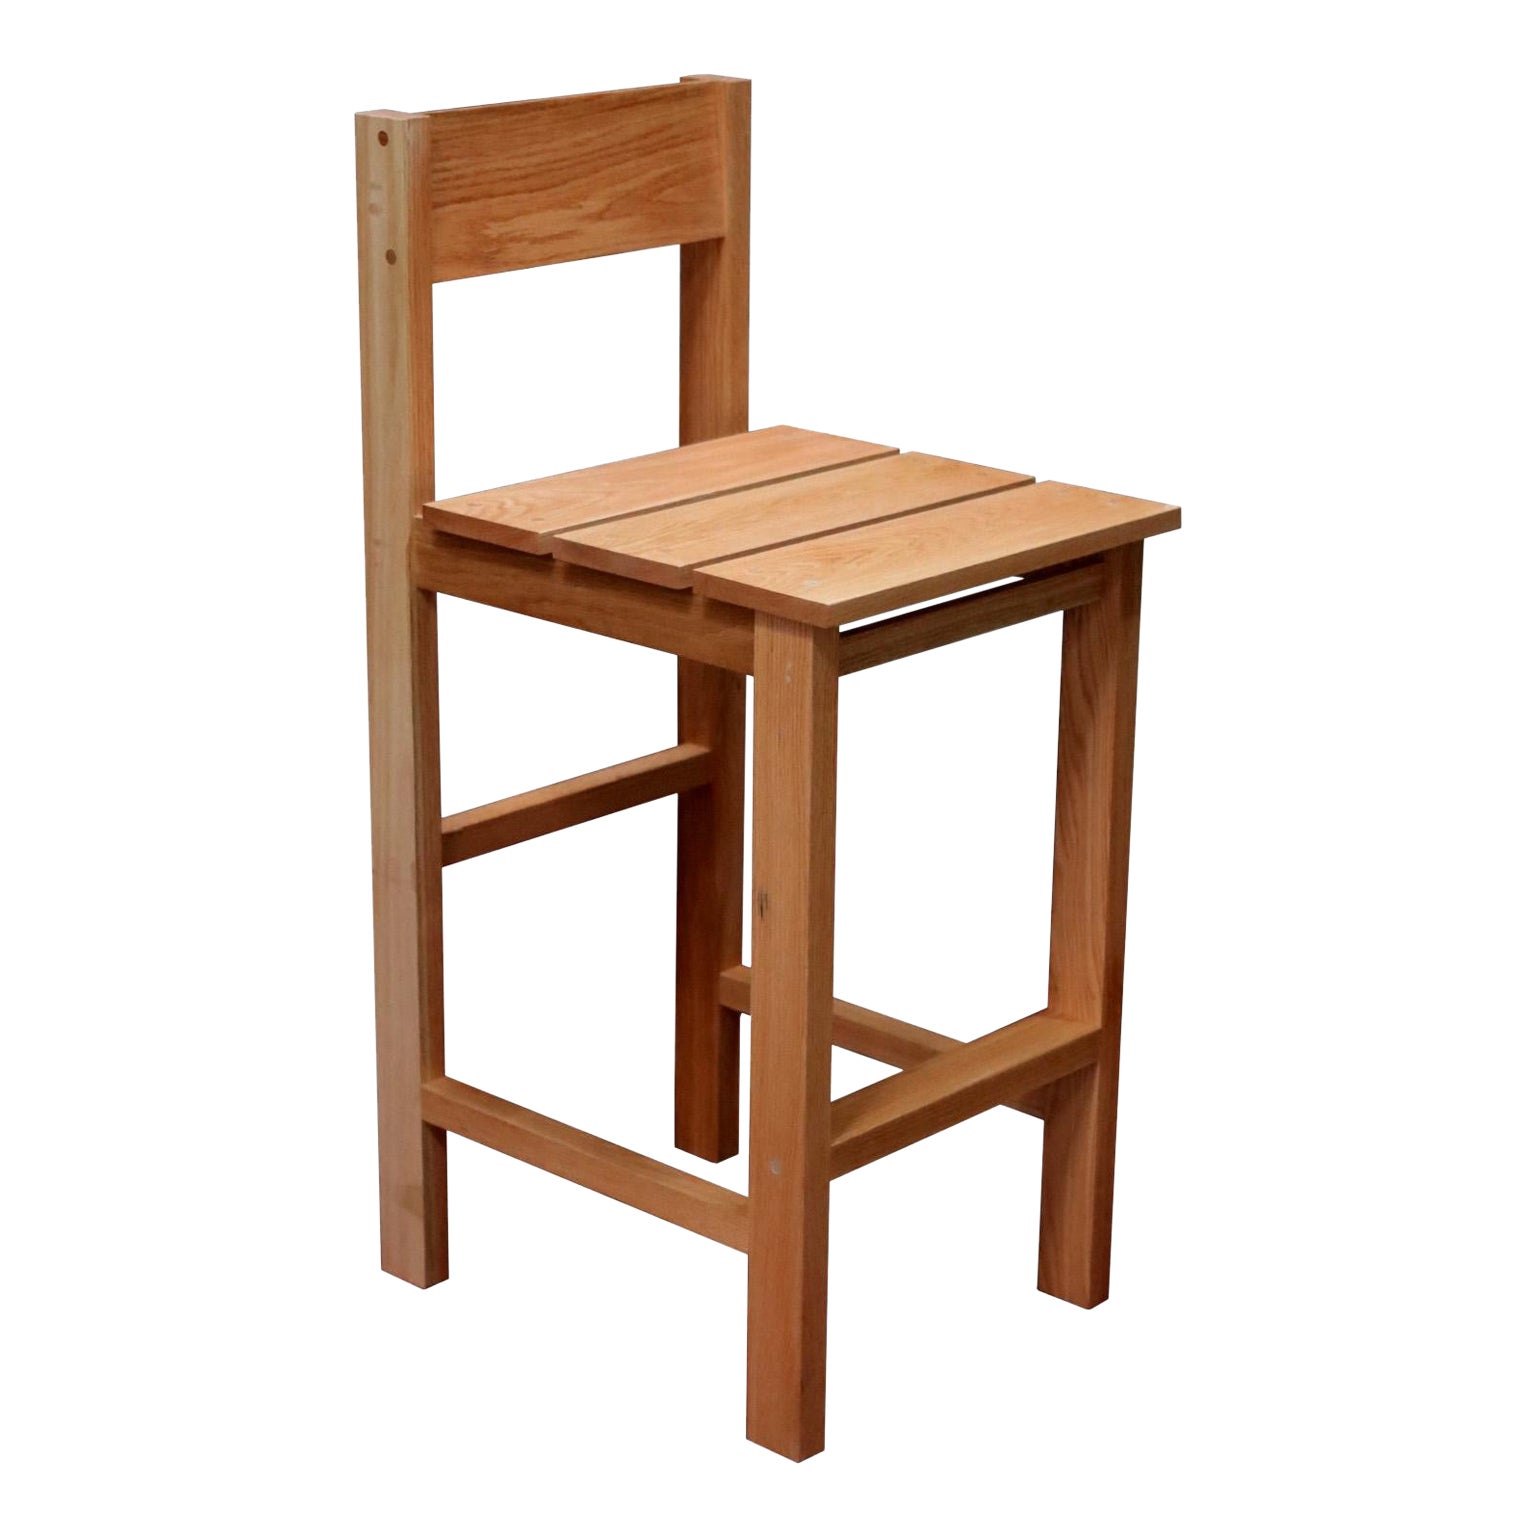 What are the two bar stool heights?